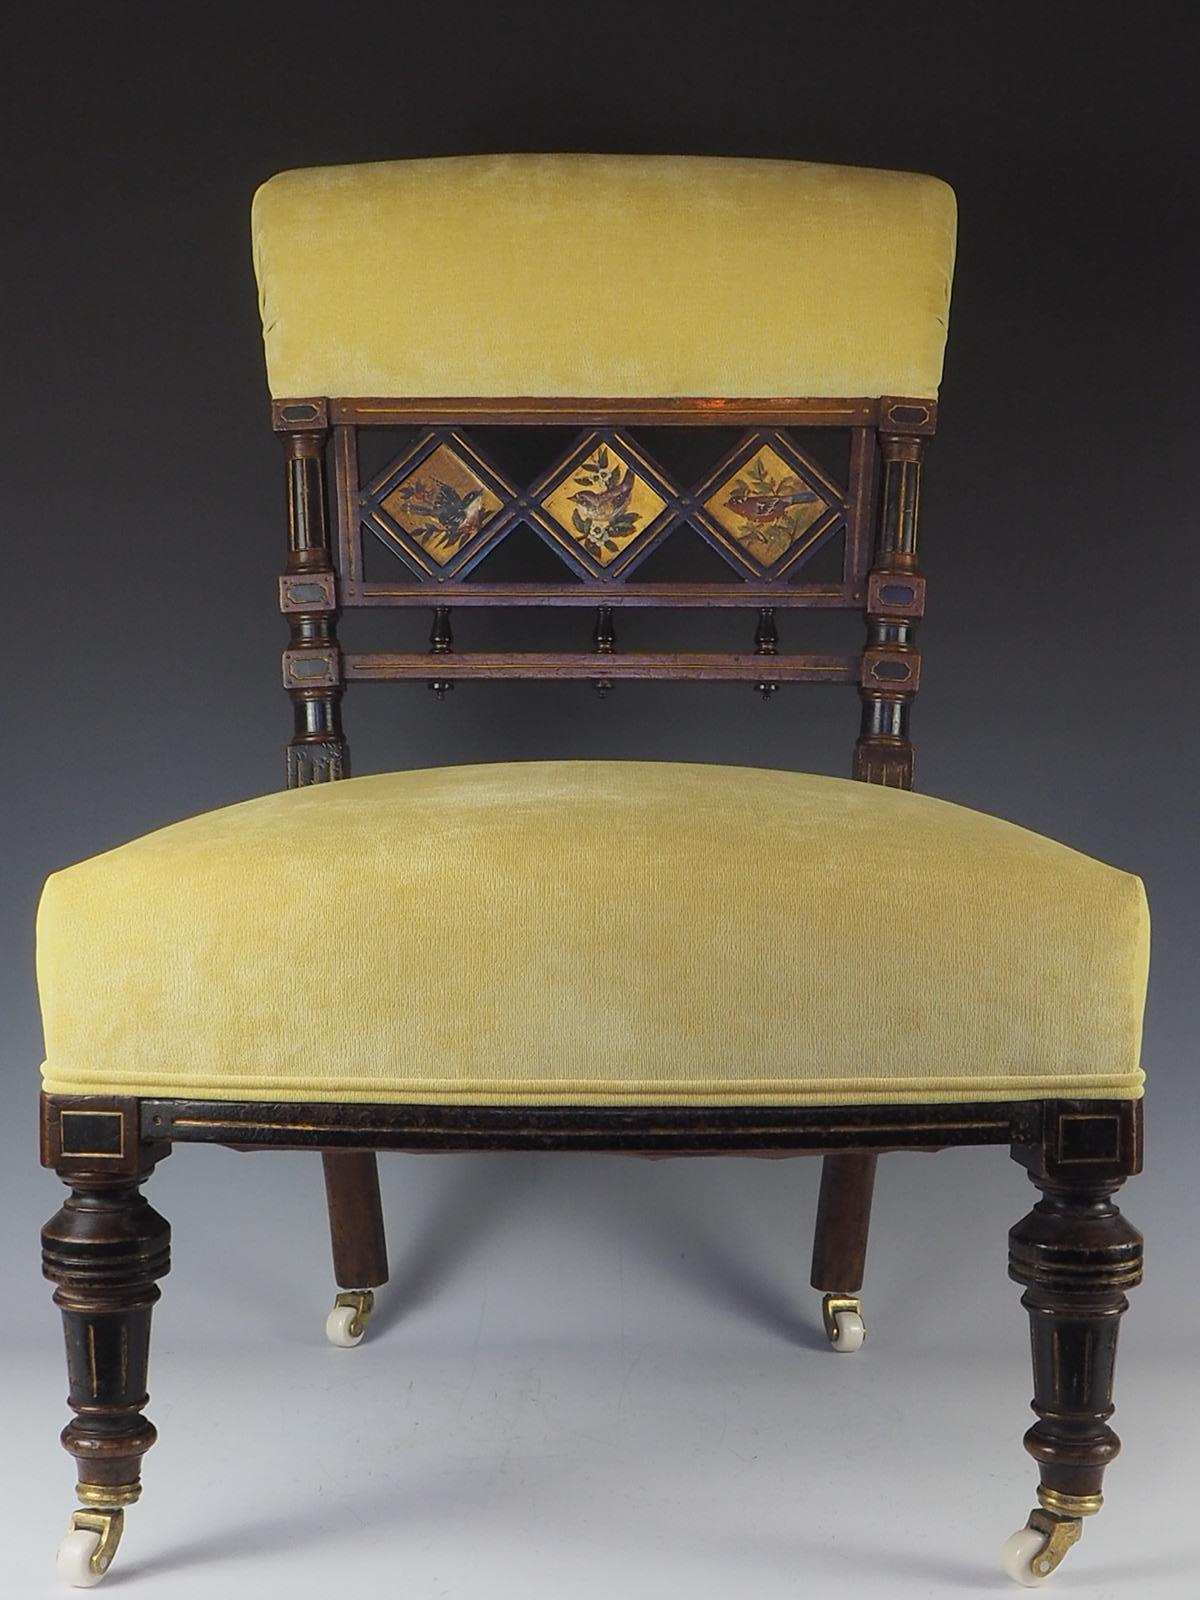 Hand-Painted Aesthetic Movement Ebonised and Gilt Side Chair with Hand Painted Birds, c. 1870 For Sale